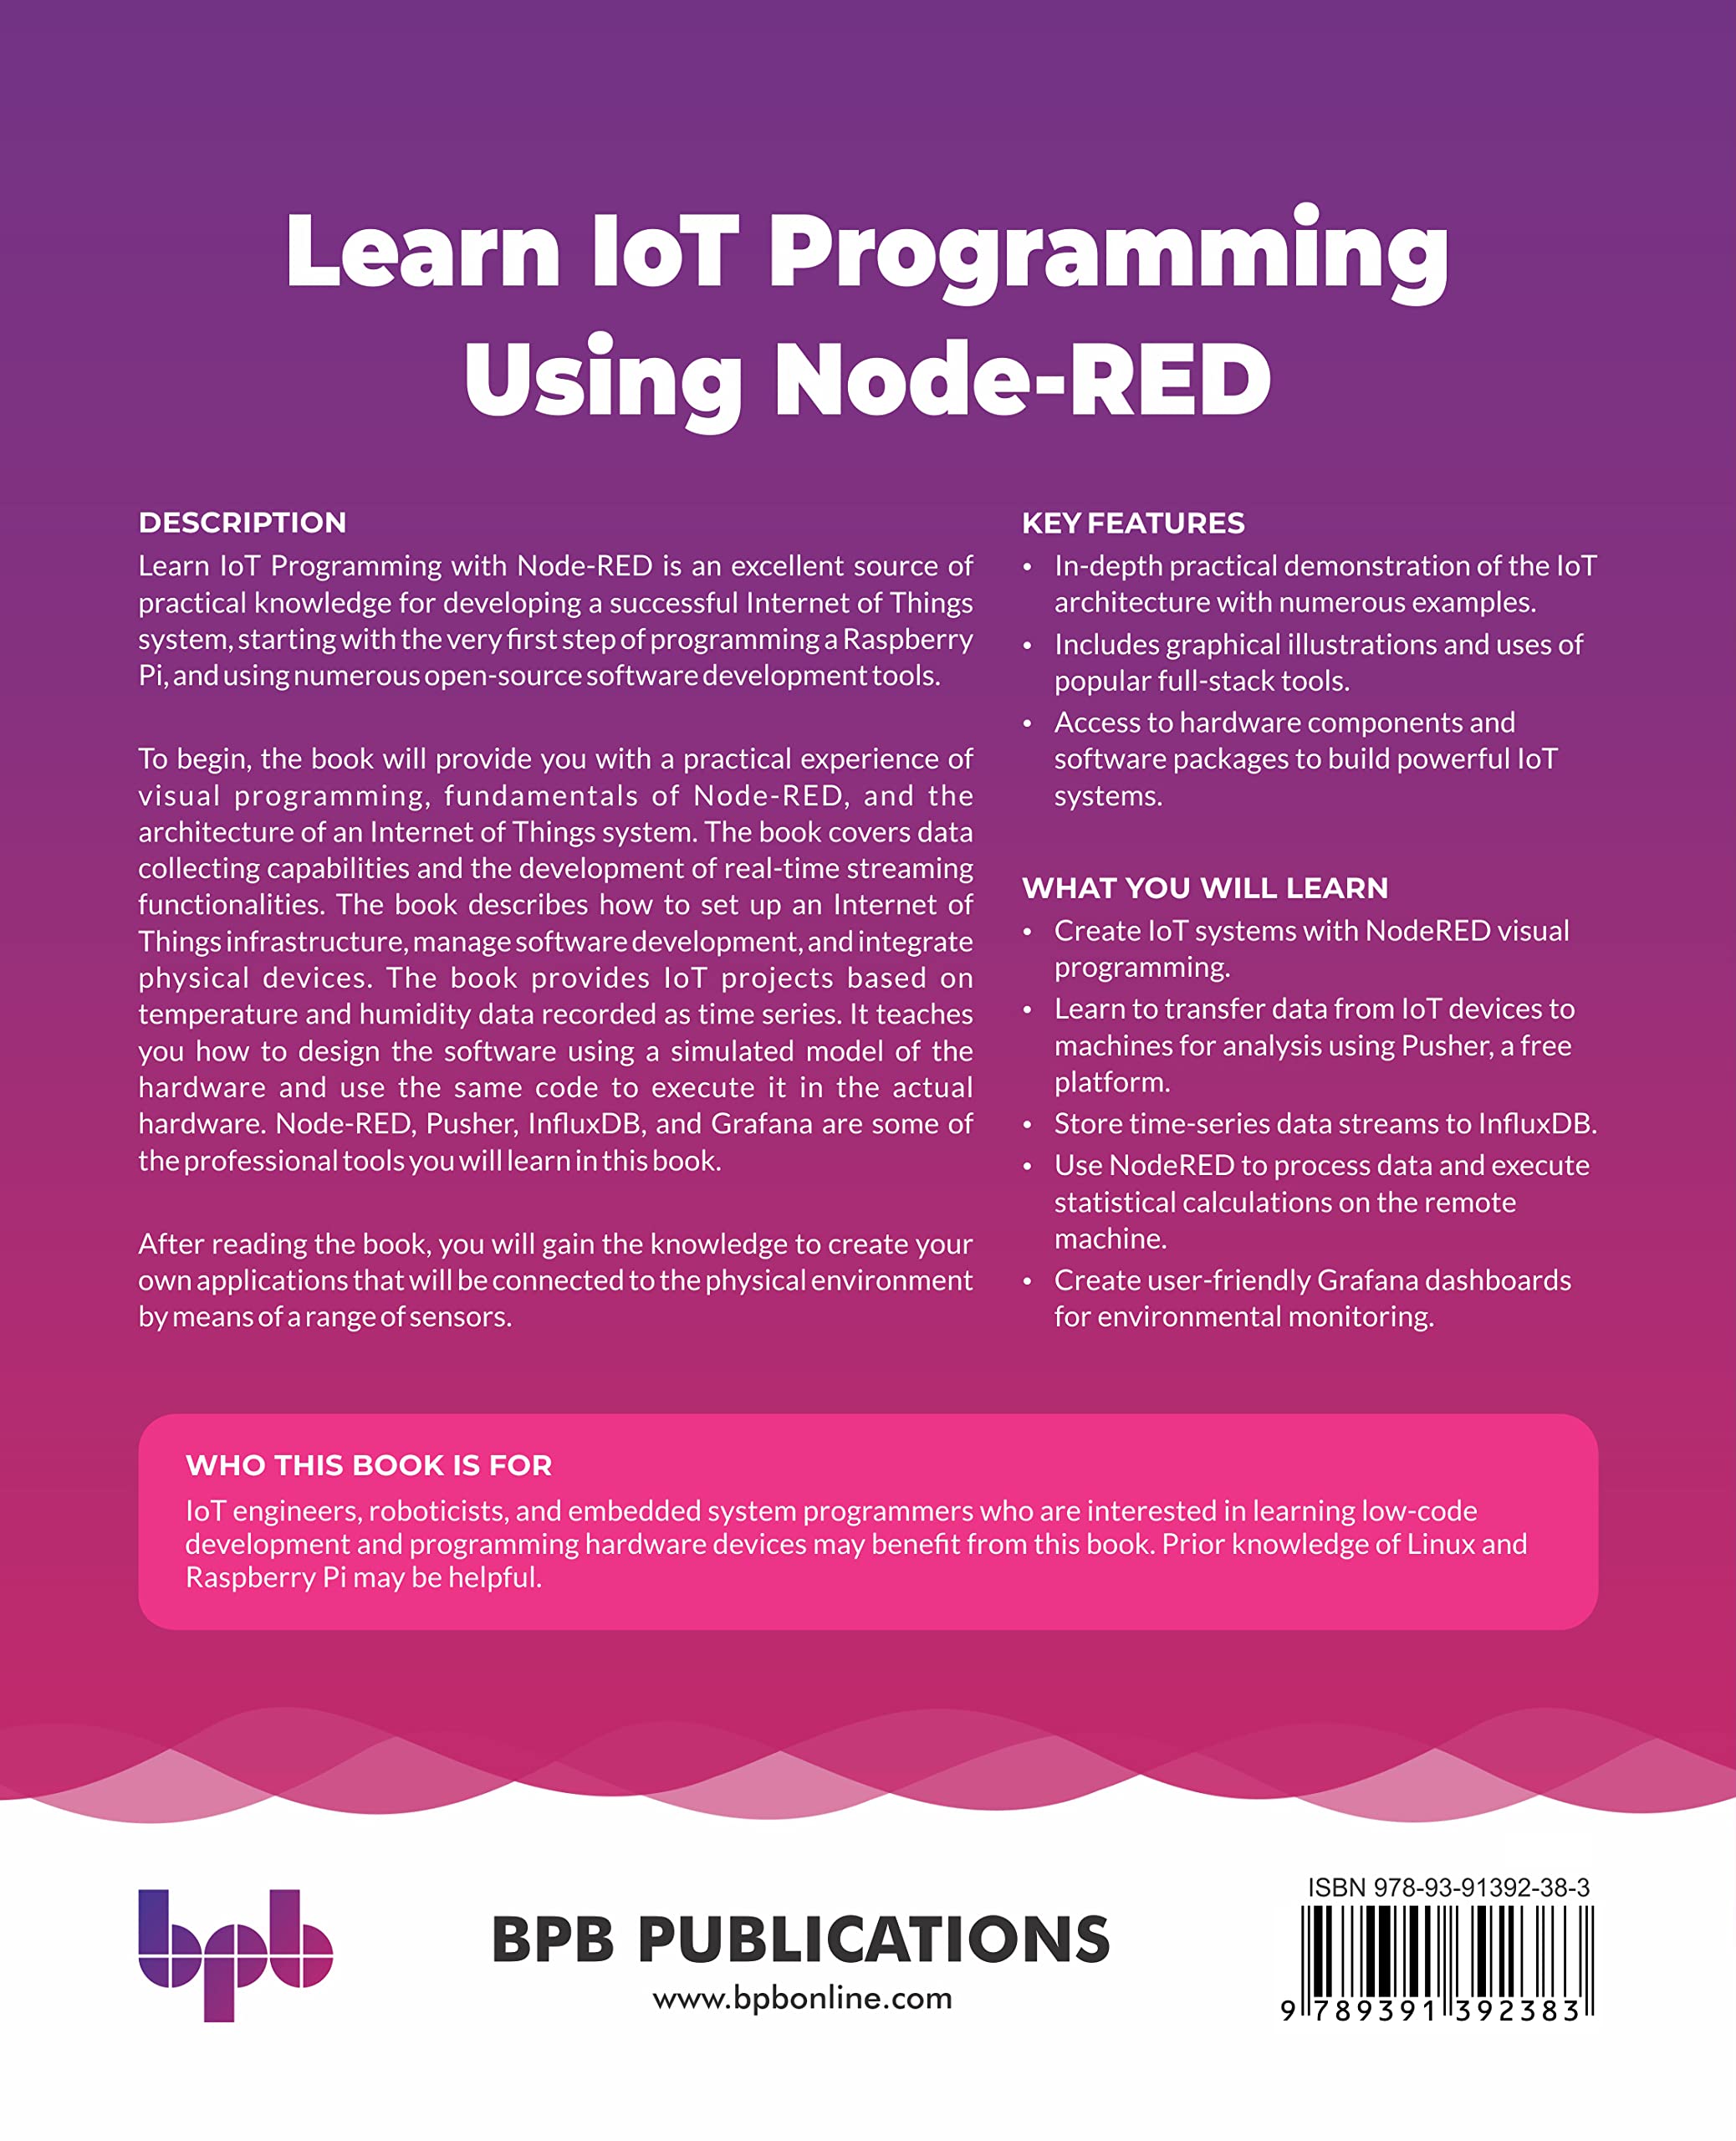 Learn IoT Programming Using Node-RED: Begin to Code Full Stack IoT Apps and Edge Devices with Raspberry Pi, NodeJS, and Grafana (English Edition)